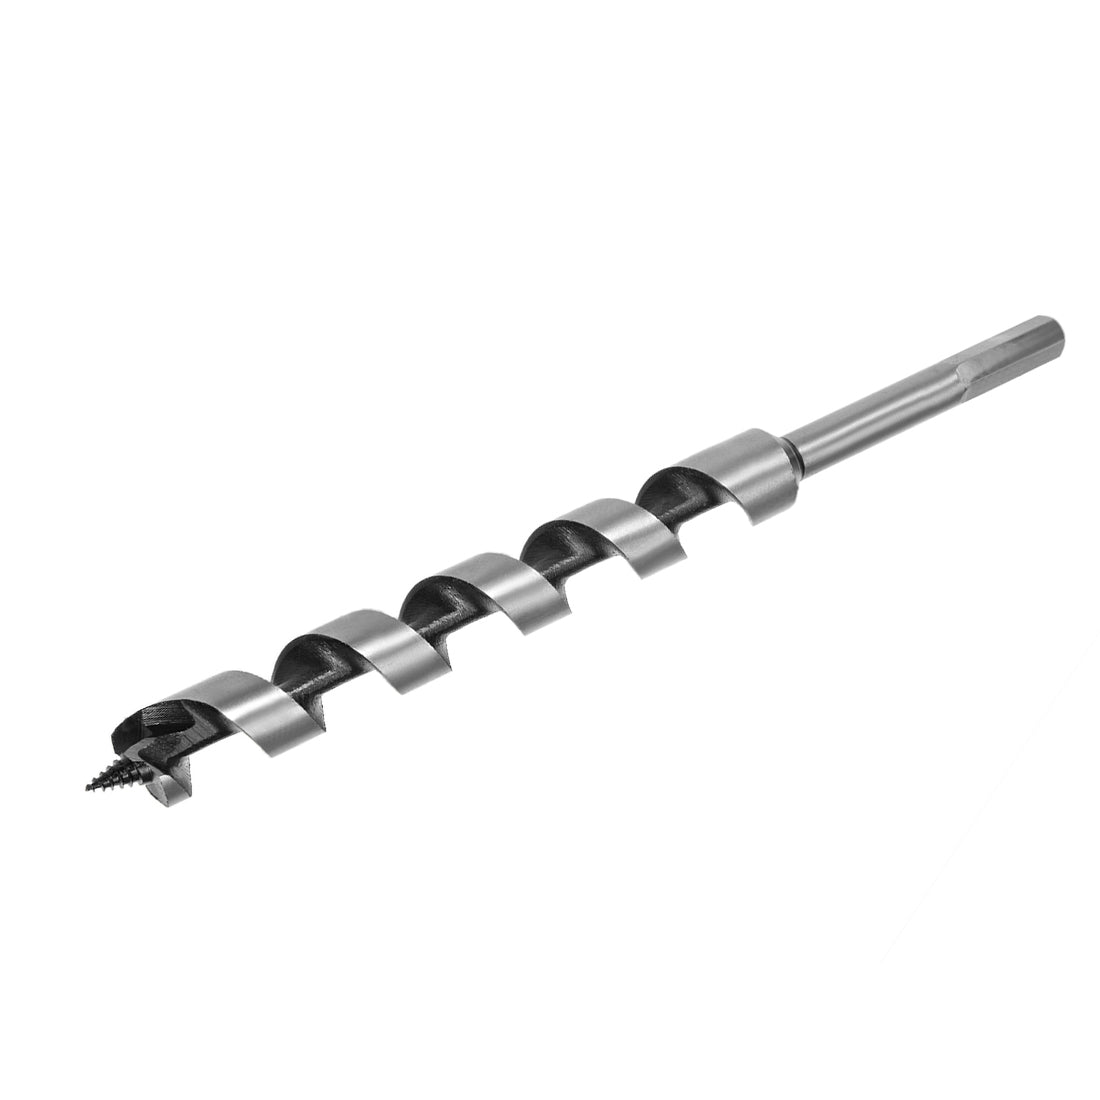 uxcell Uxcell Auger Drill Bit Wood Hex Shank 18mm Cutting Dia High Carbon Steel for Electric Bench Drill Woodworking Carpentry